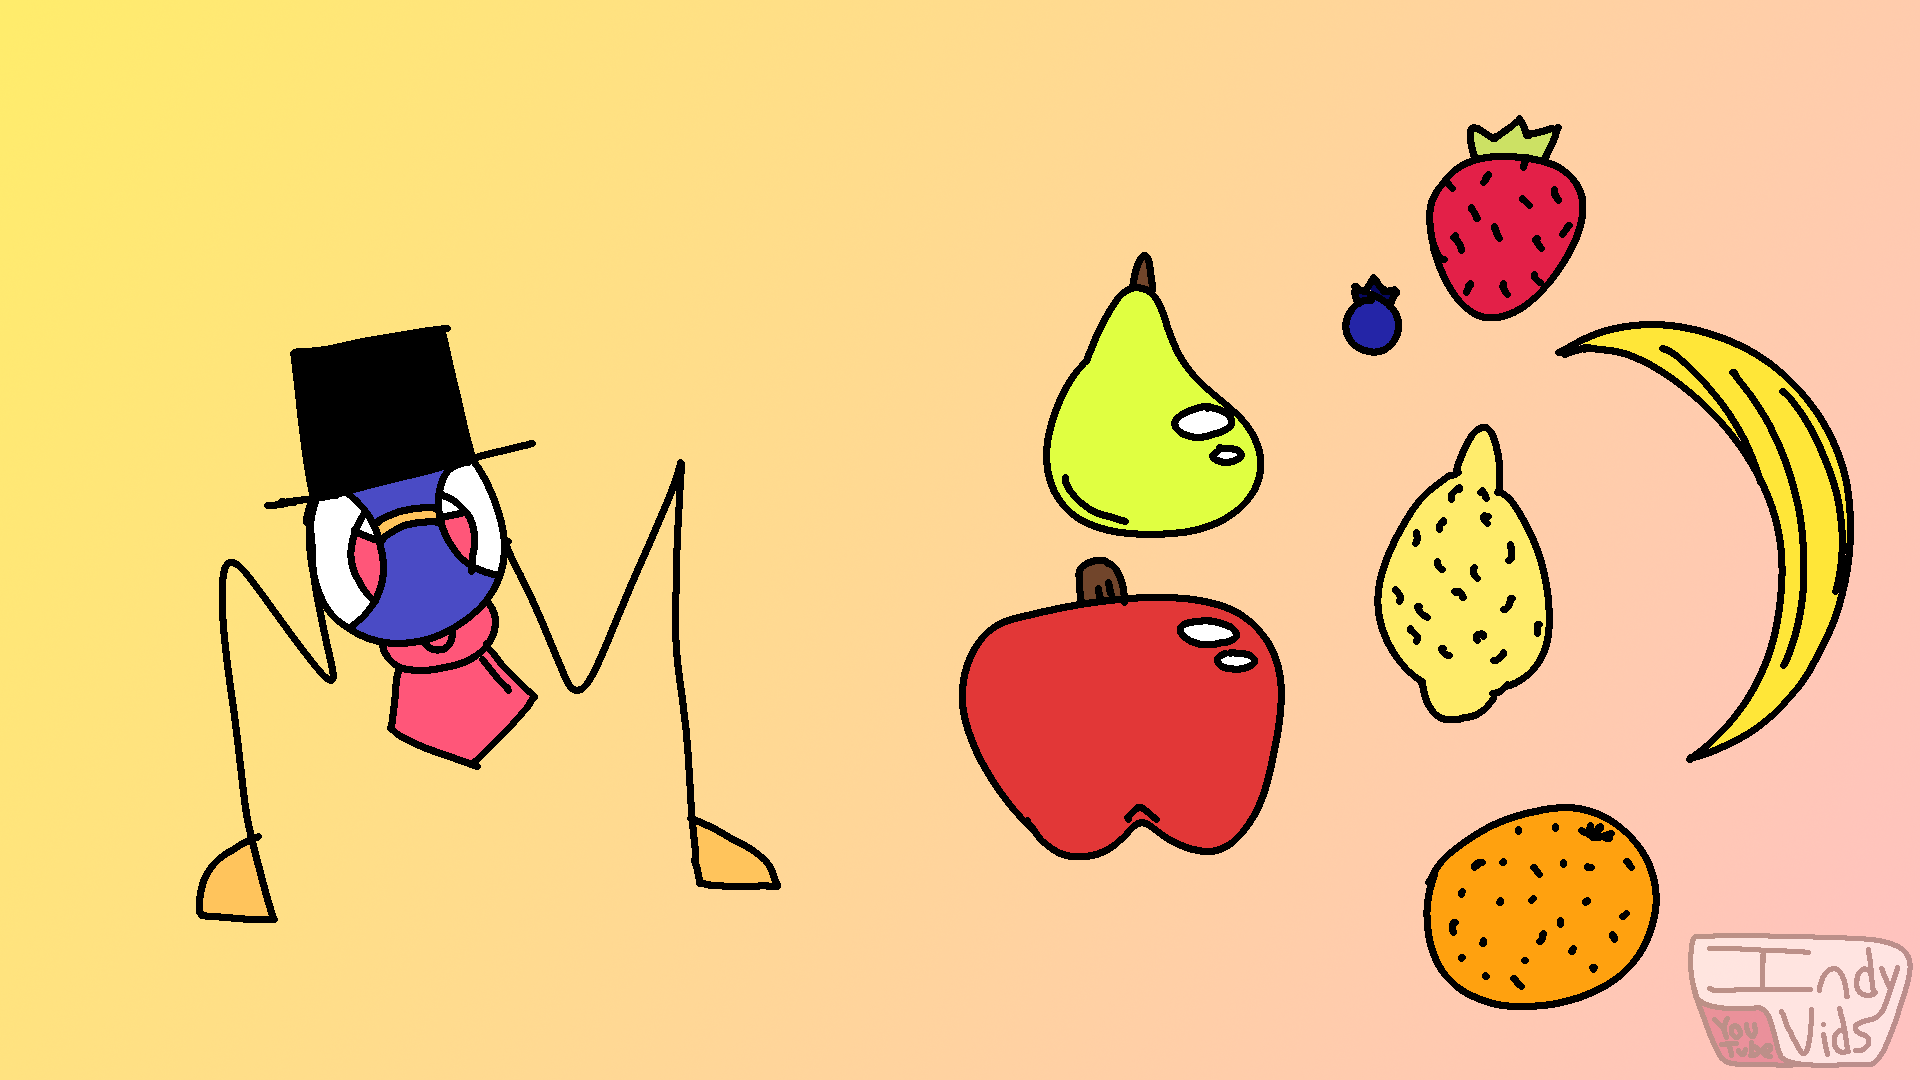 A bug-like creature with a top hat and bowtie, beside various fruits and berries.